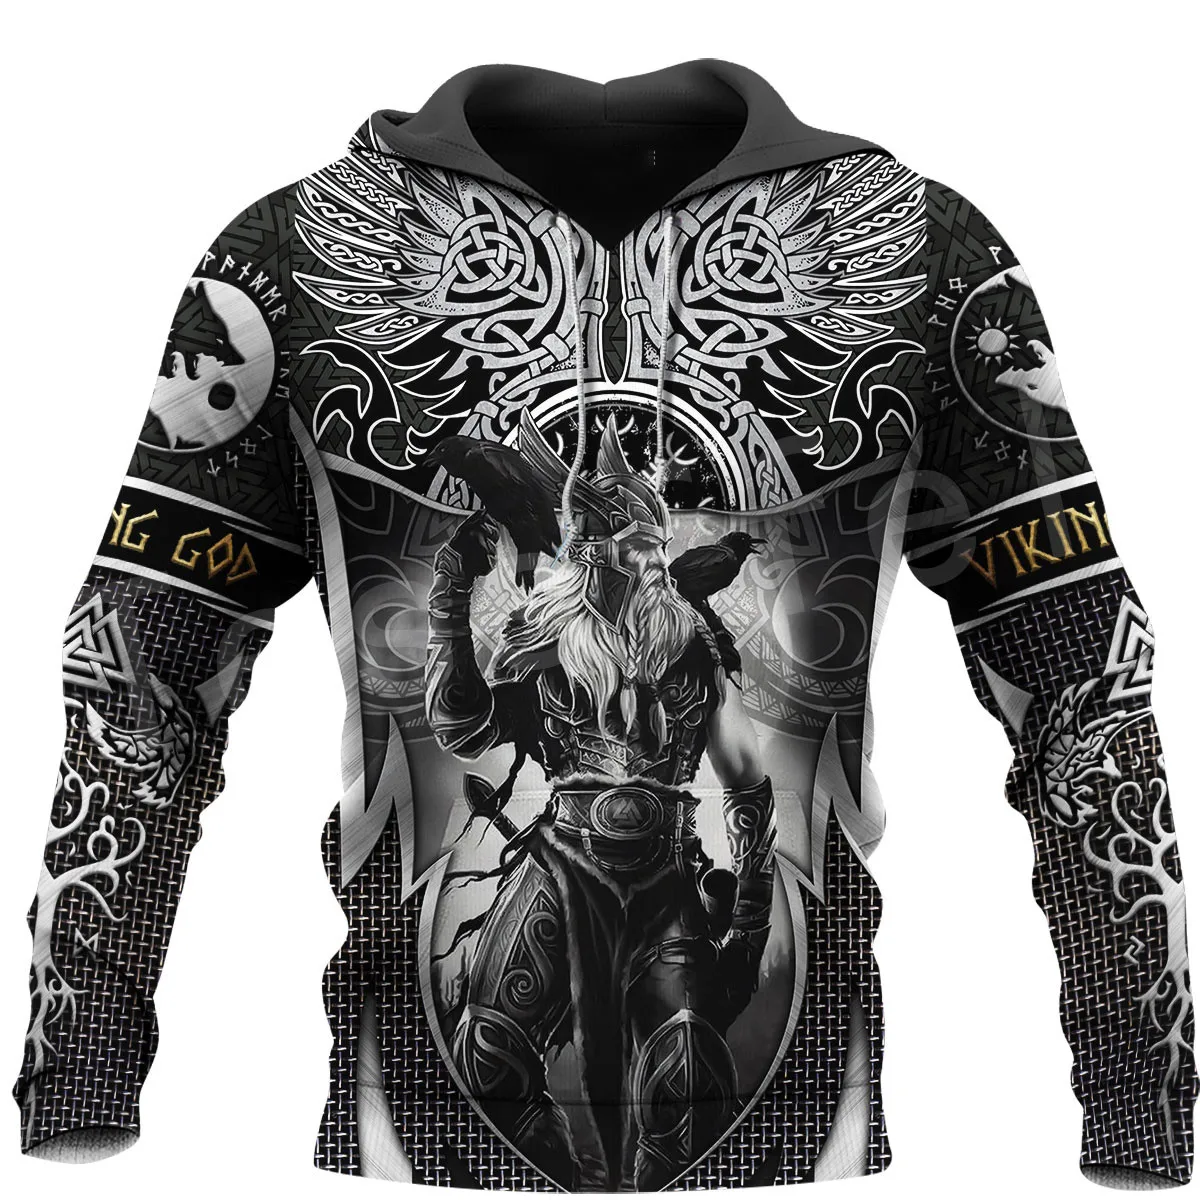 2023 New Autumn Men's Hoodie Wolf Print 3D Sweatshirts Urban Trendy All-Match Oversized Tops Poleron Hooded Clothes Men Clothing